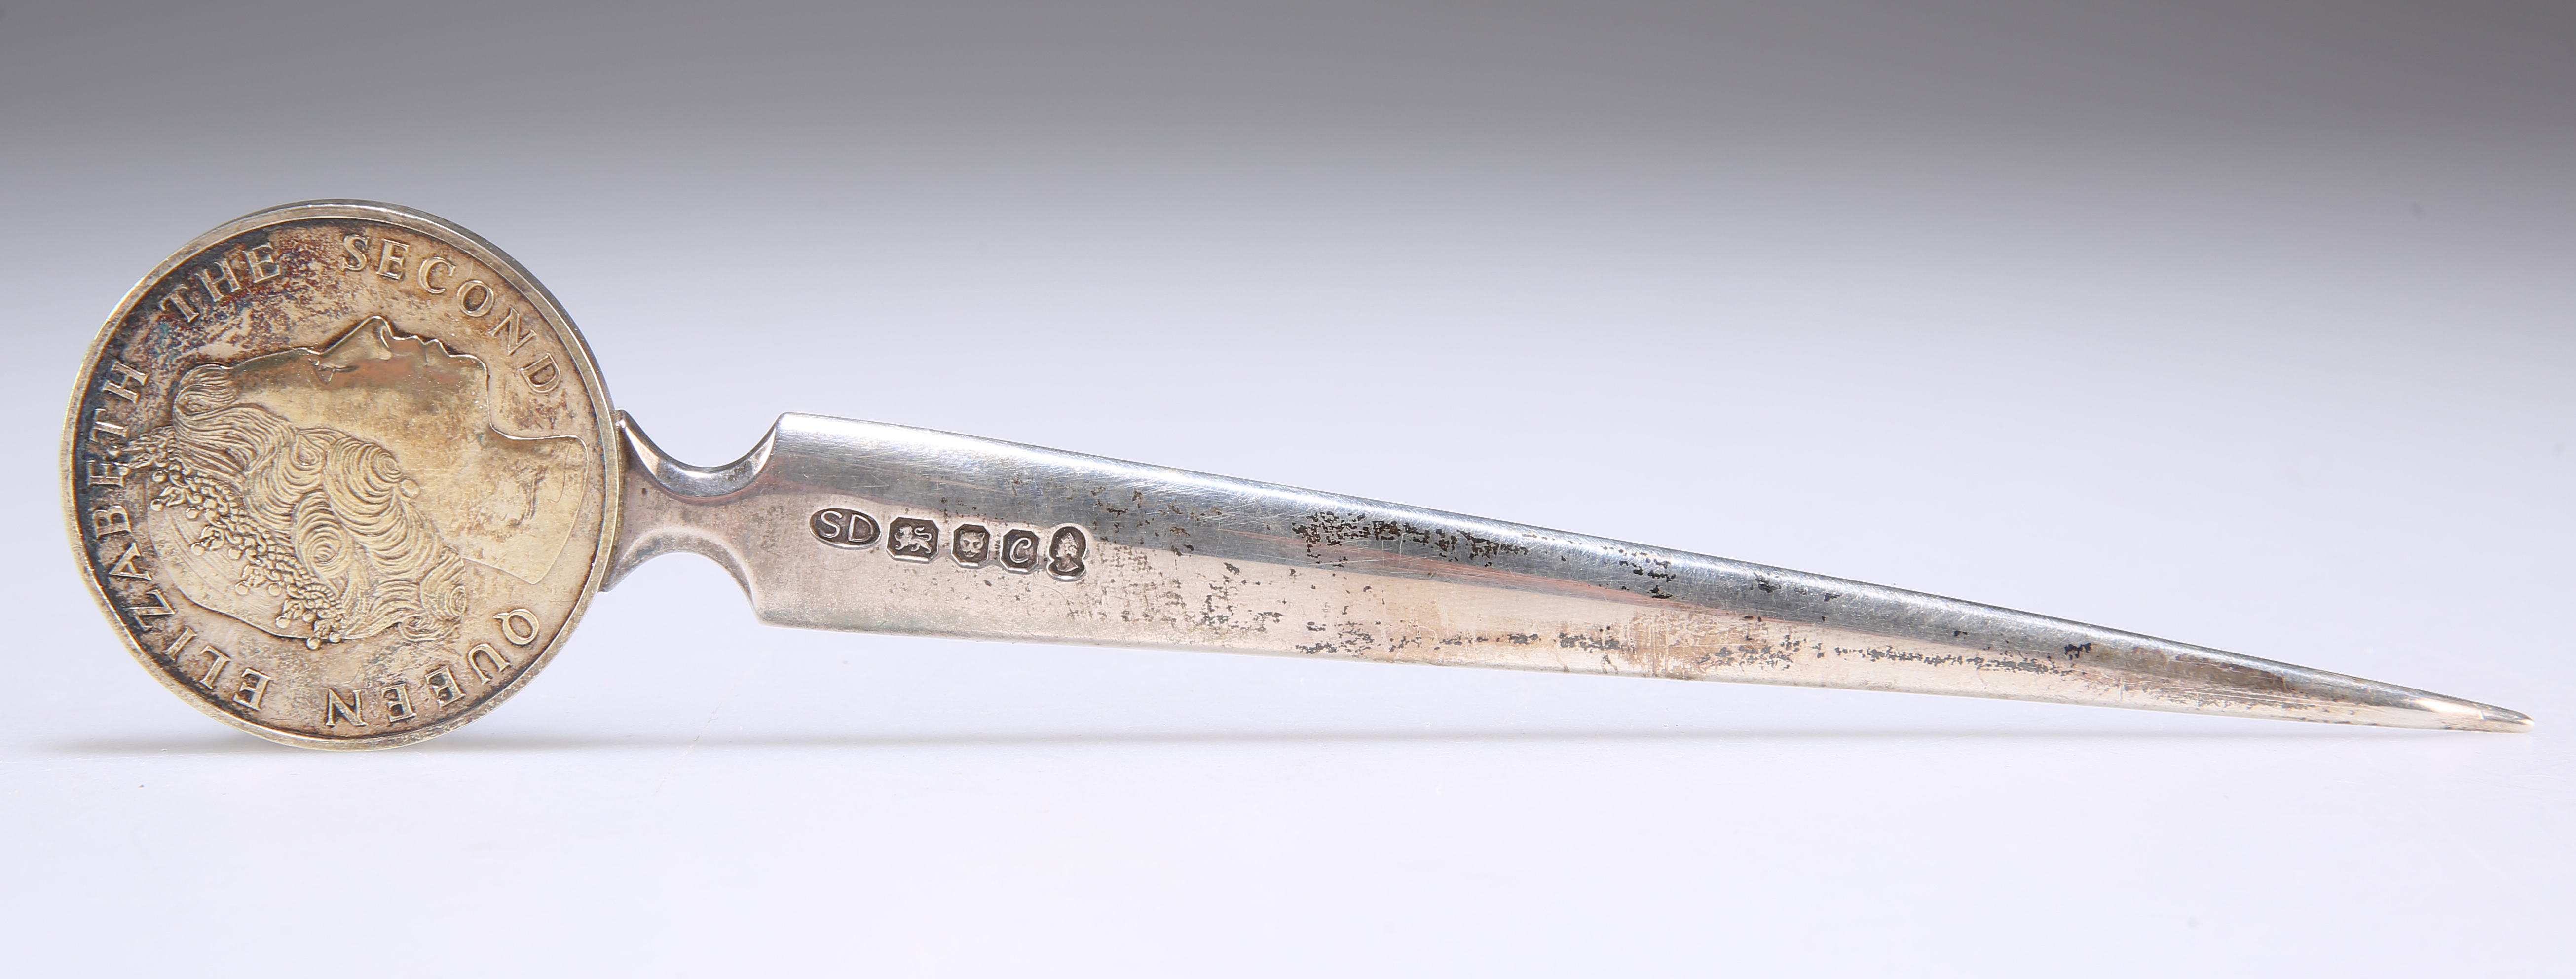 A ROYAL COMMEMORATIVE SILVER LETTER OPENER - Image 3 of 3